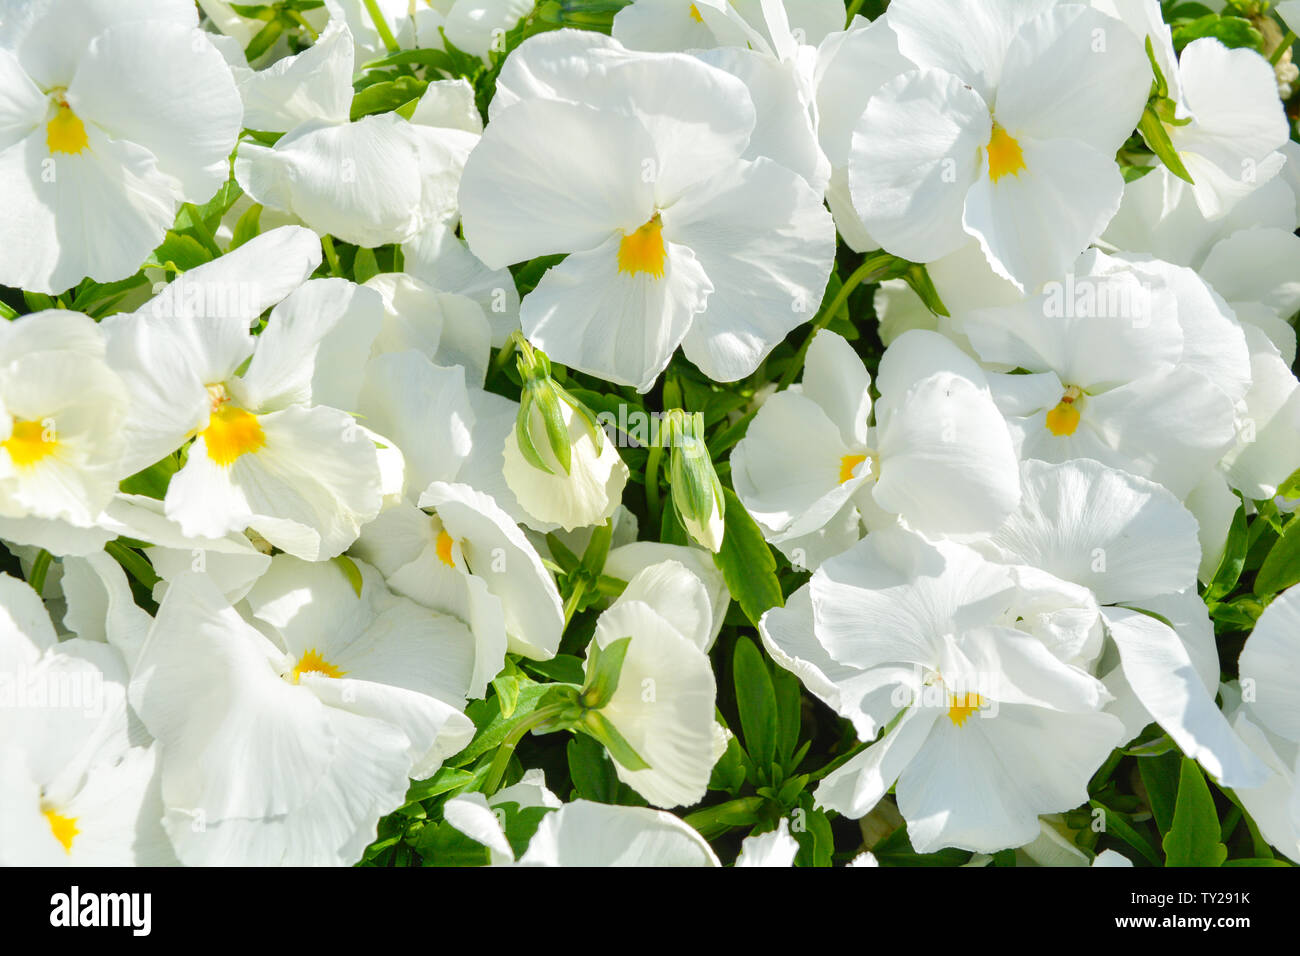 Group of white Viola canadensis flowers in sunny day. White viola or pansy flowers blossom in garden. Beautiful Viola flowers background in nature Stock Photo